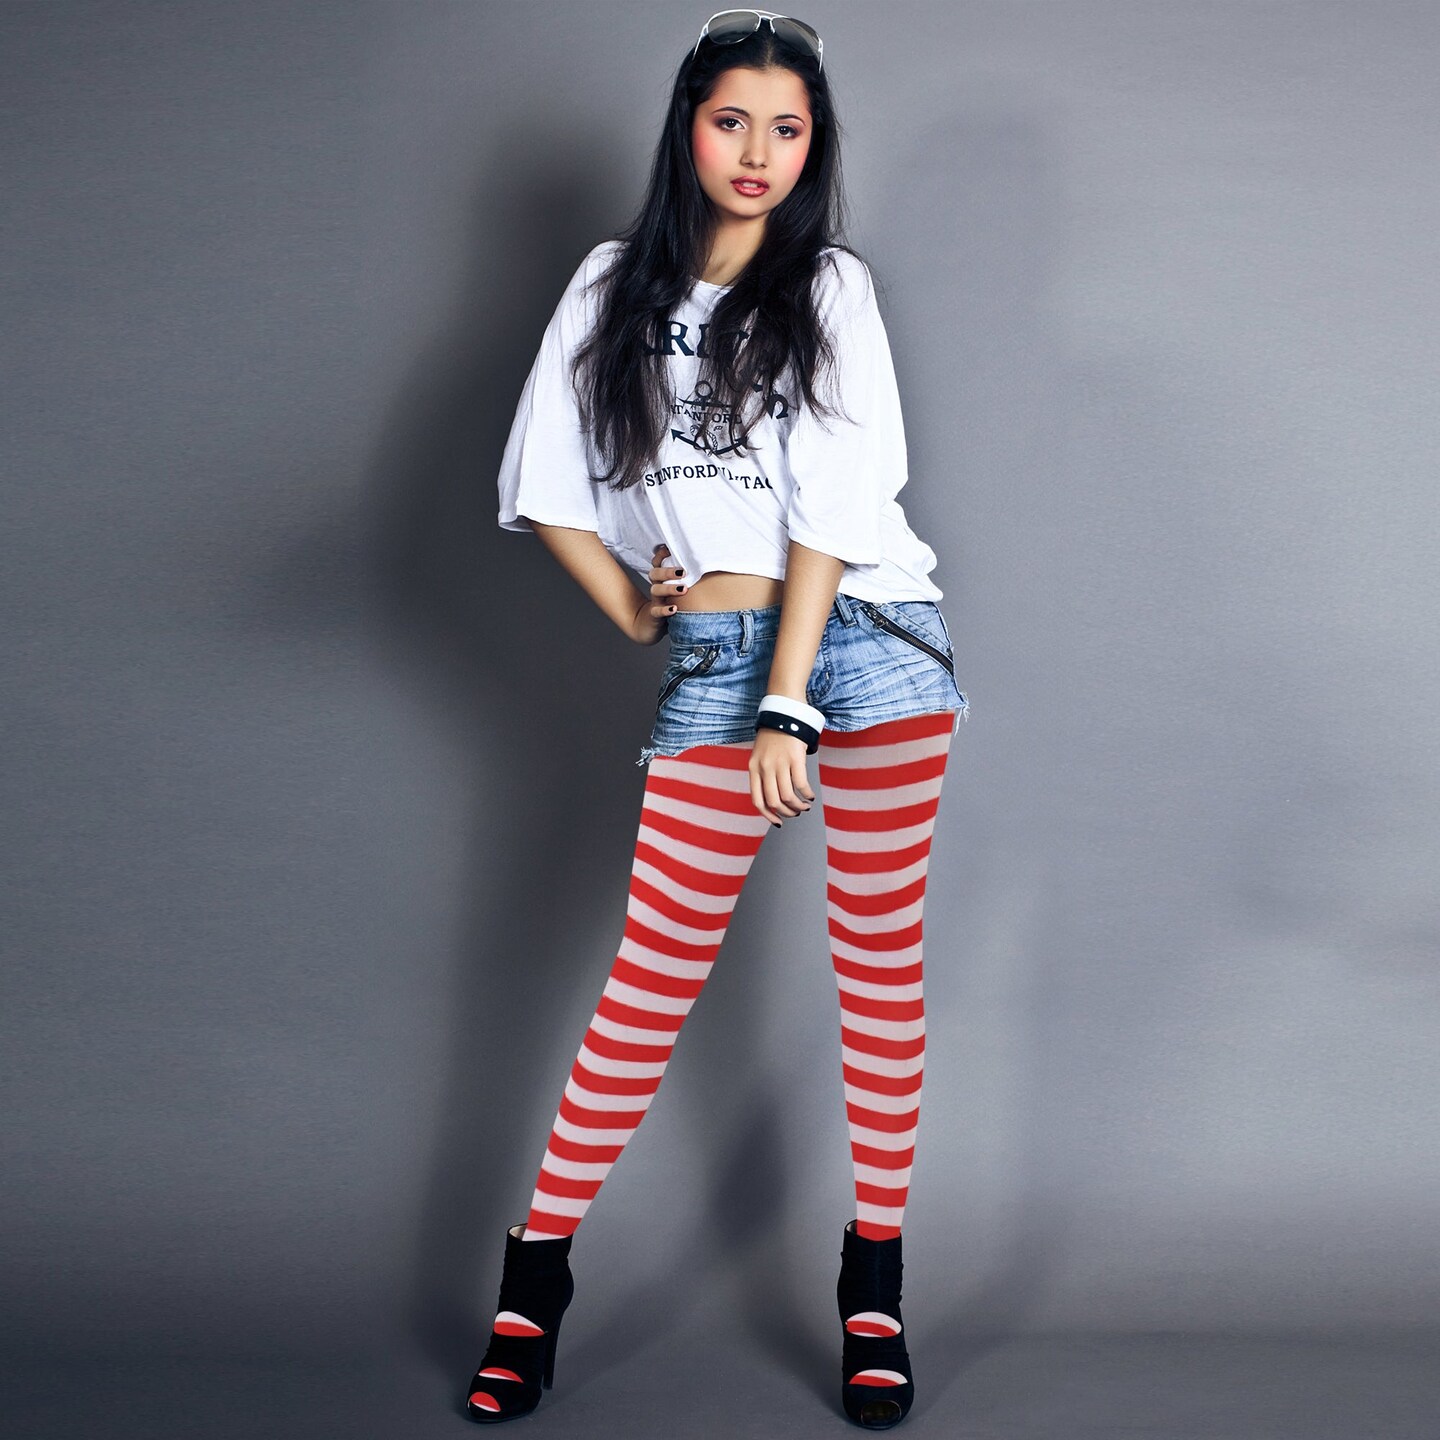 White and Red Tights - Striped Nylon Stretch Pantyhose Stocking Accessories  for Every Day Attire and Costumes for Teens and Kids